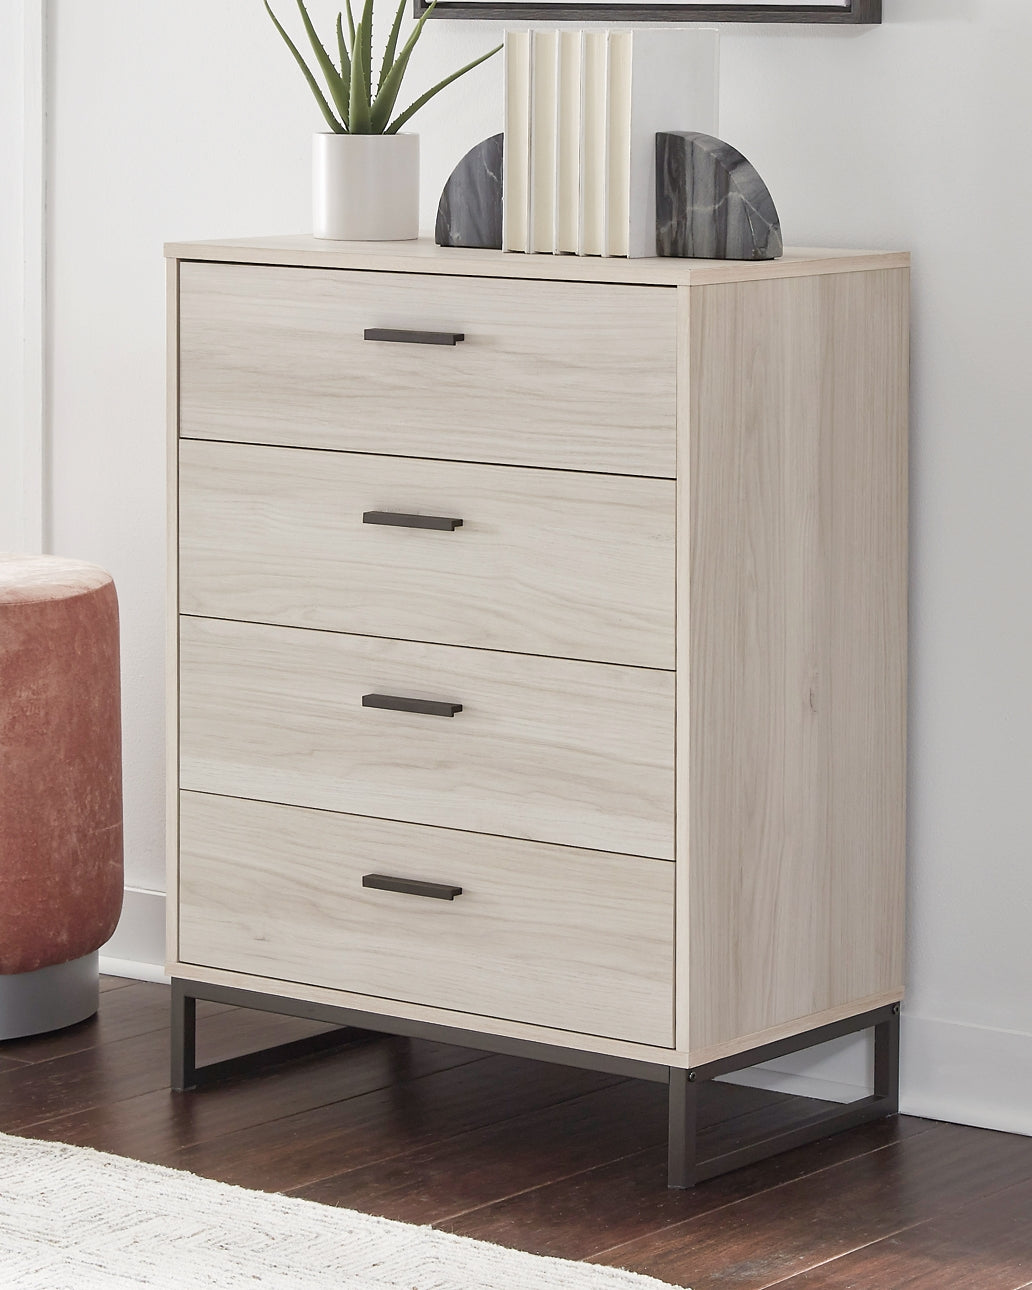 Socalle Four Drawer Chest